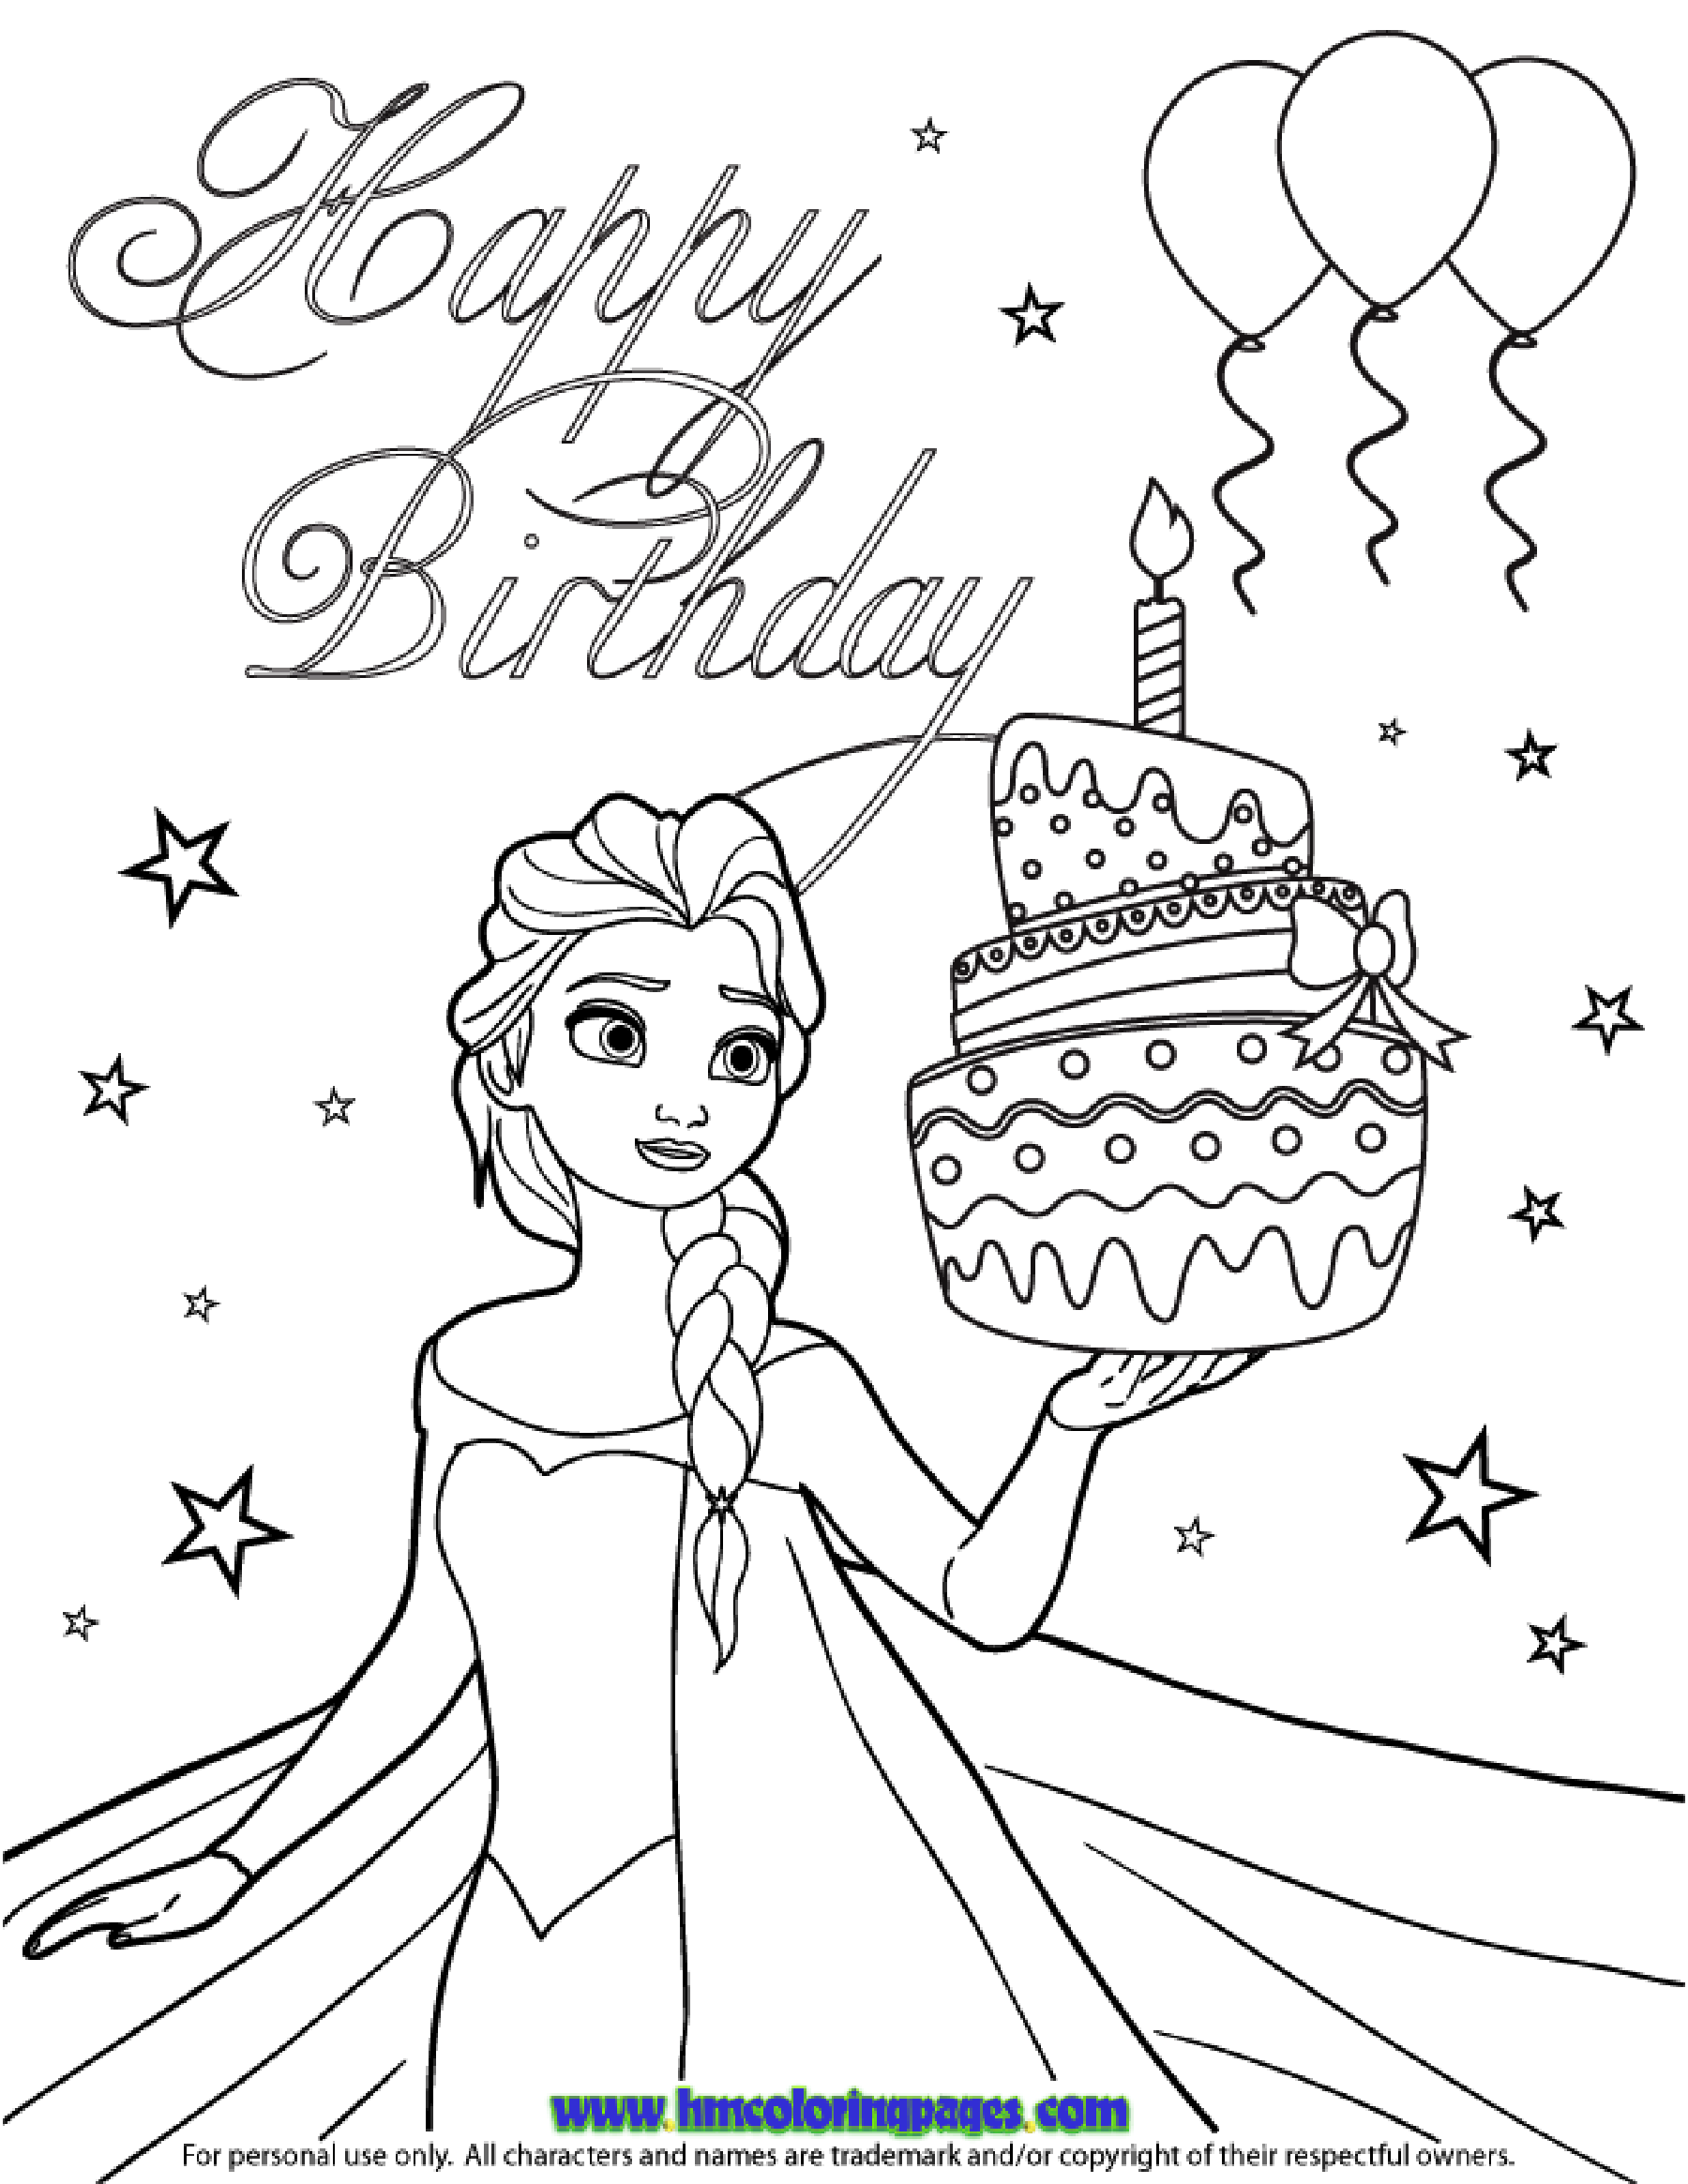 Free Frozen coloring page to download : Happy Birthday with Elsa